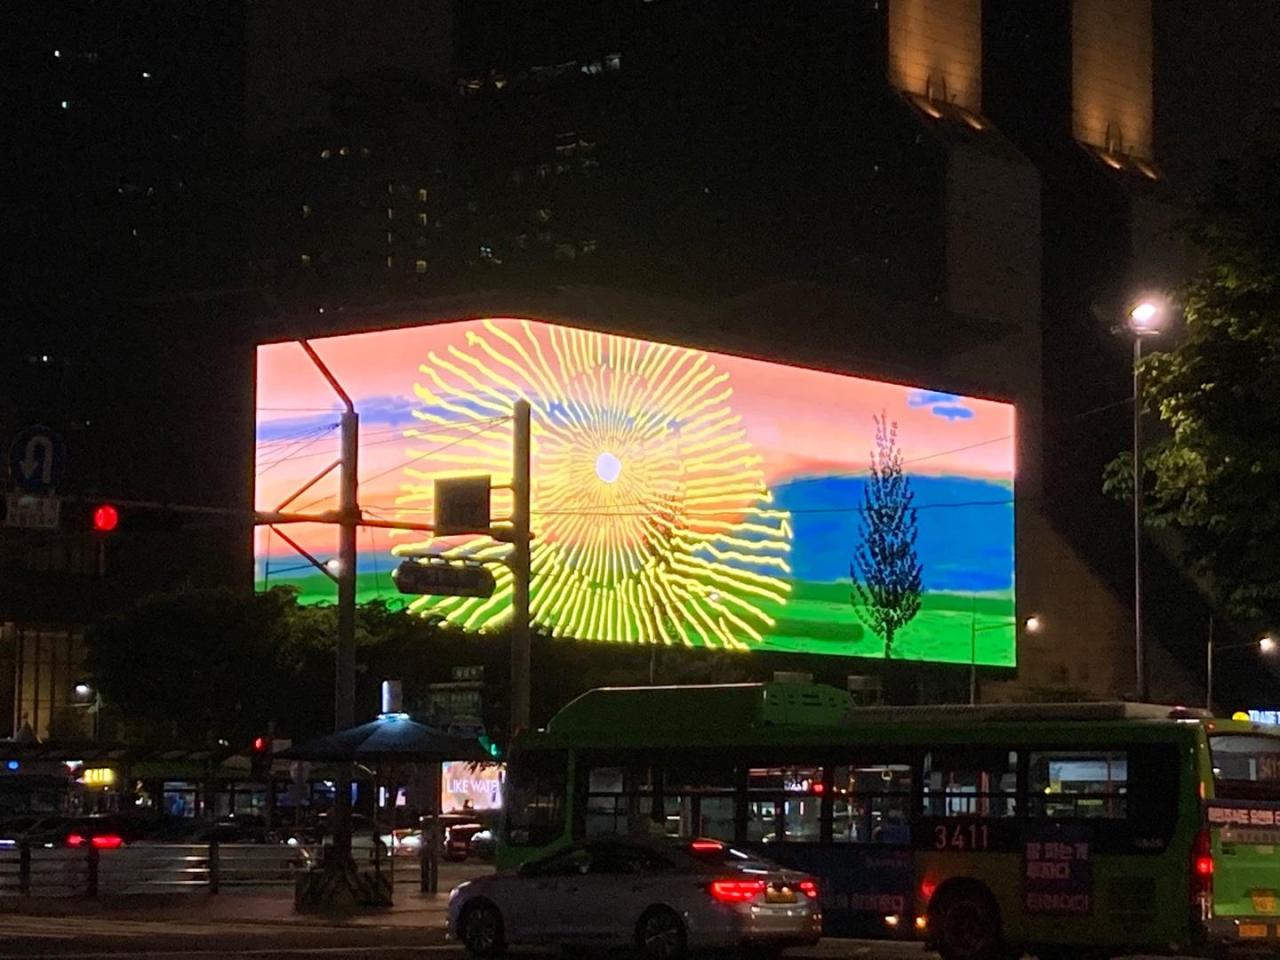 David Hockney’s “Remember you cannot look at the sun or death for very long” video is shown on the LED screen at K-pop Square in Samseong-dong, Seoul, Saturday. (Yonhap)